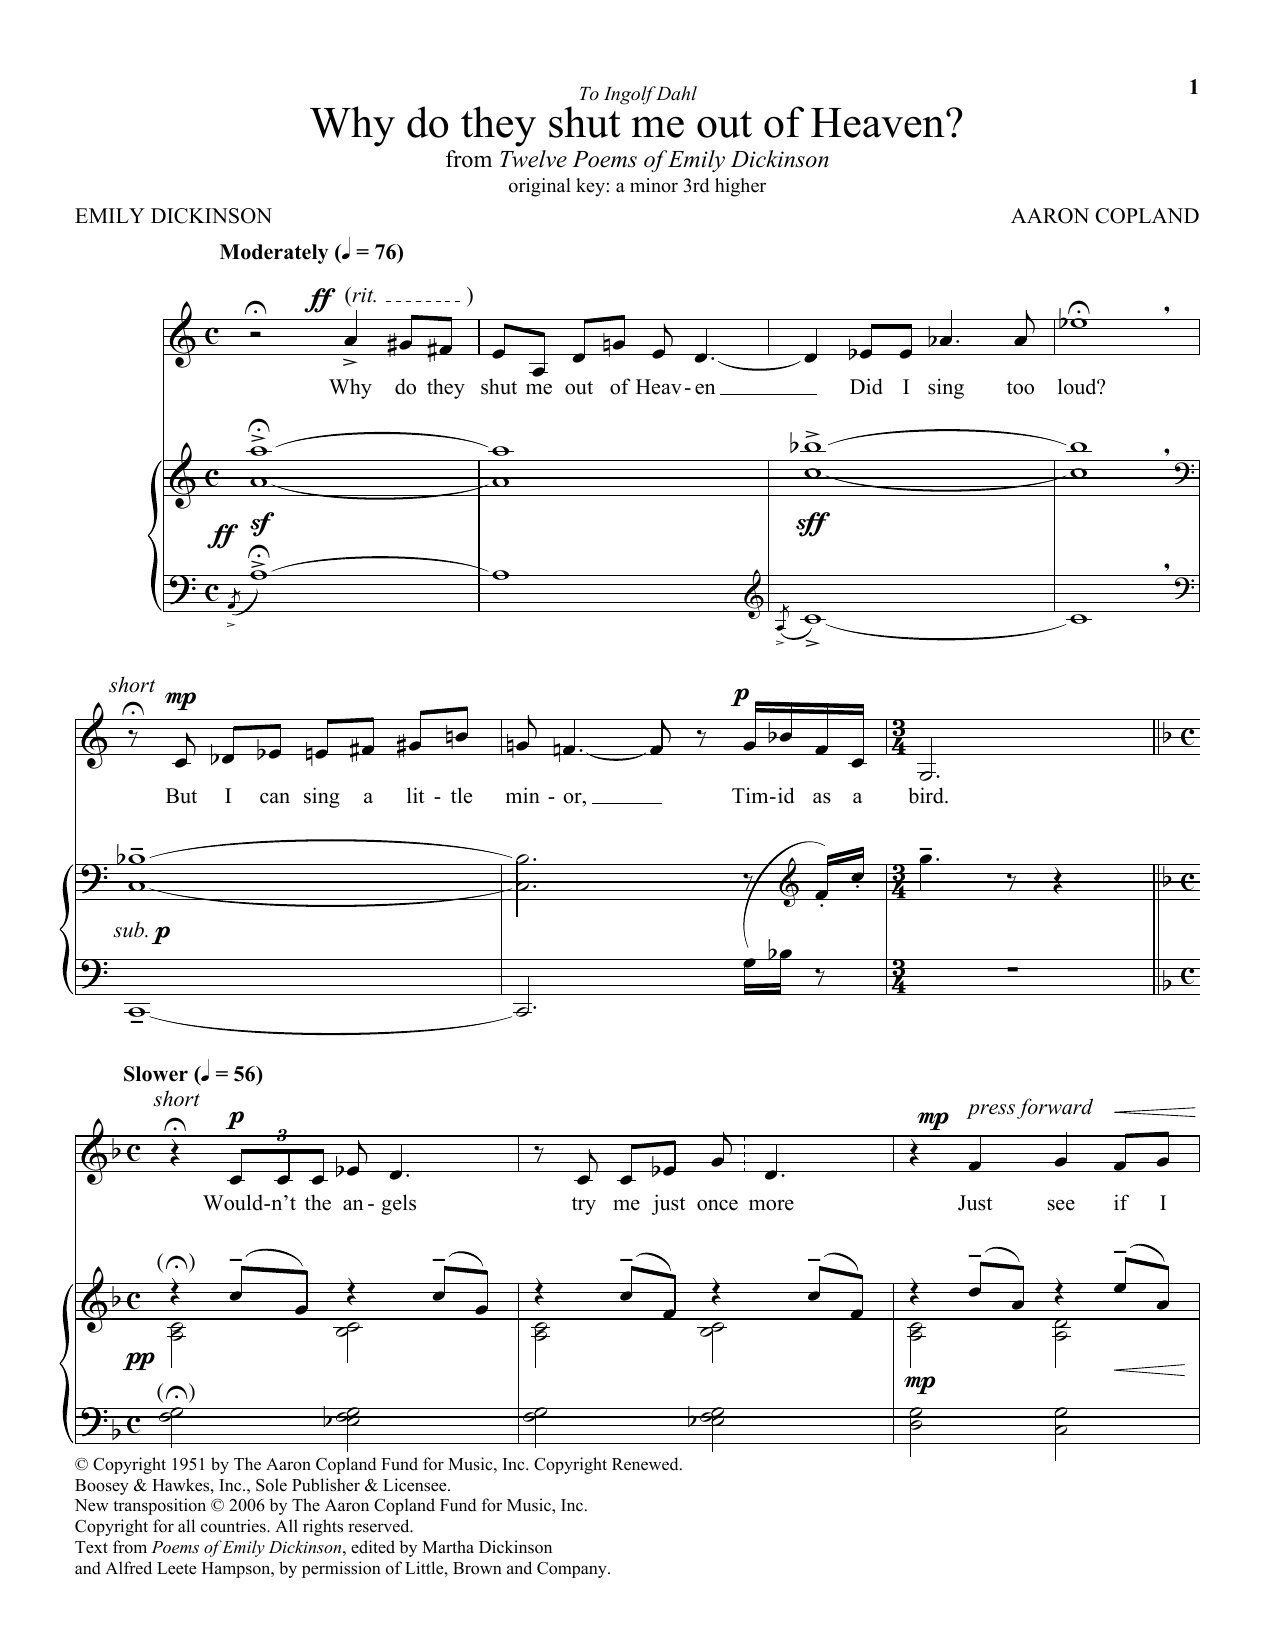 Download Aaron Copland Why Do They Shut Me Out Of Heaven? Sheet Music